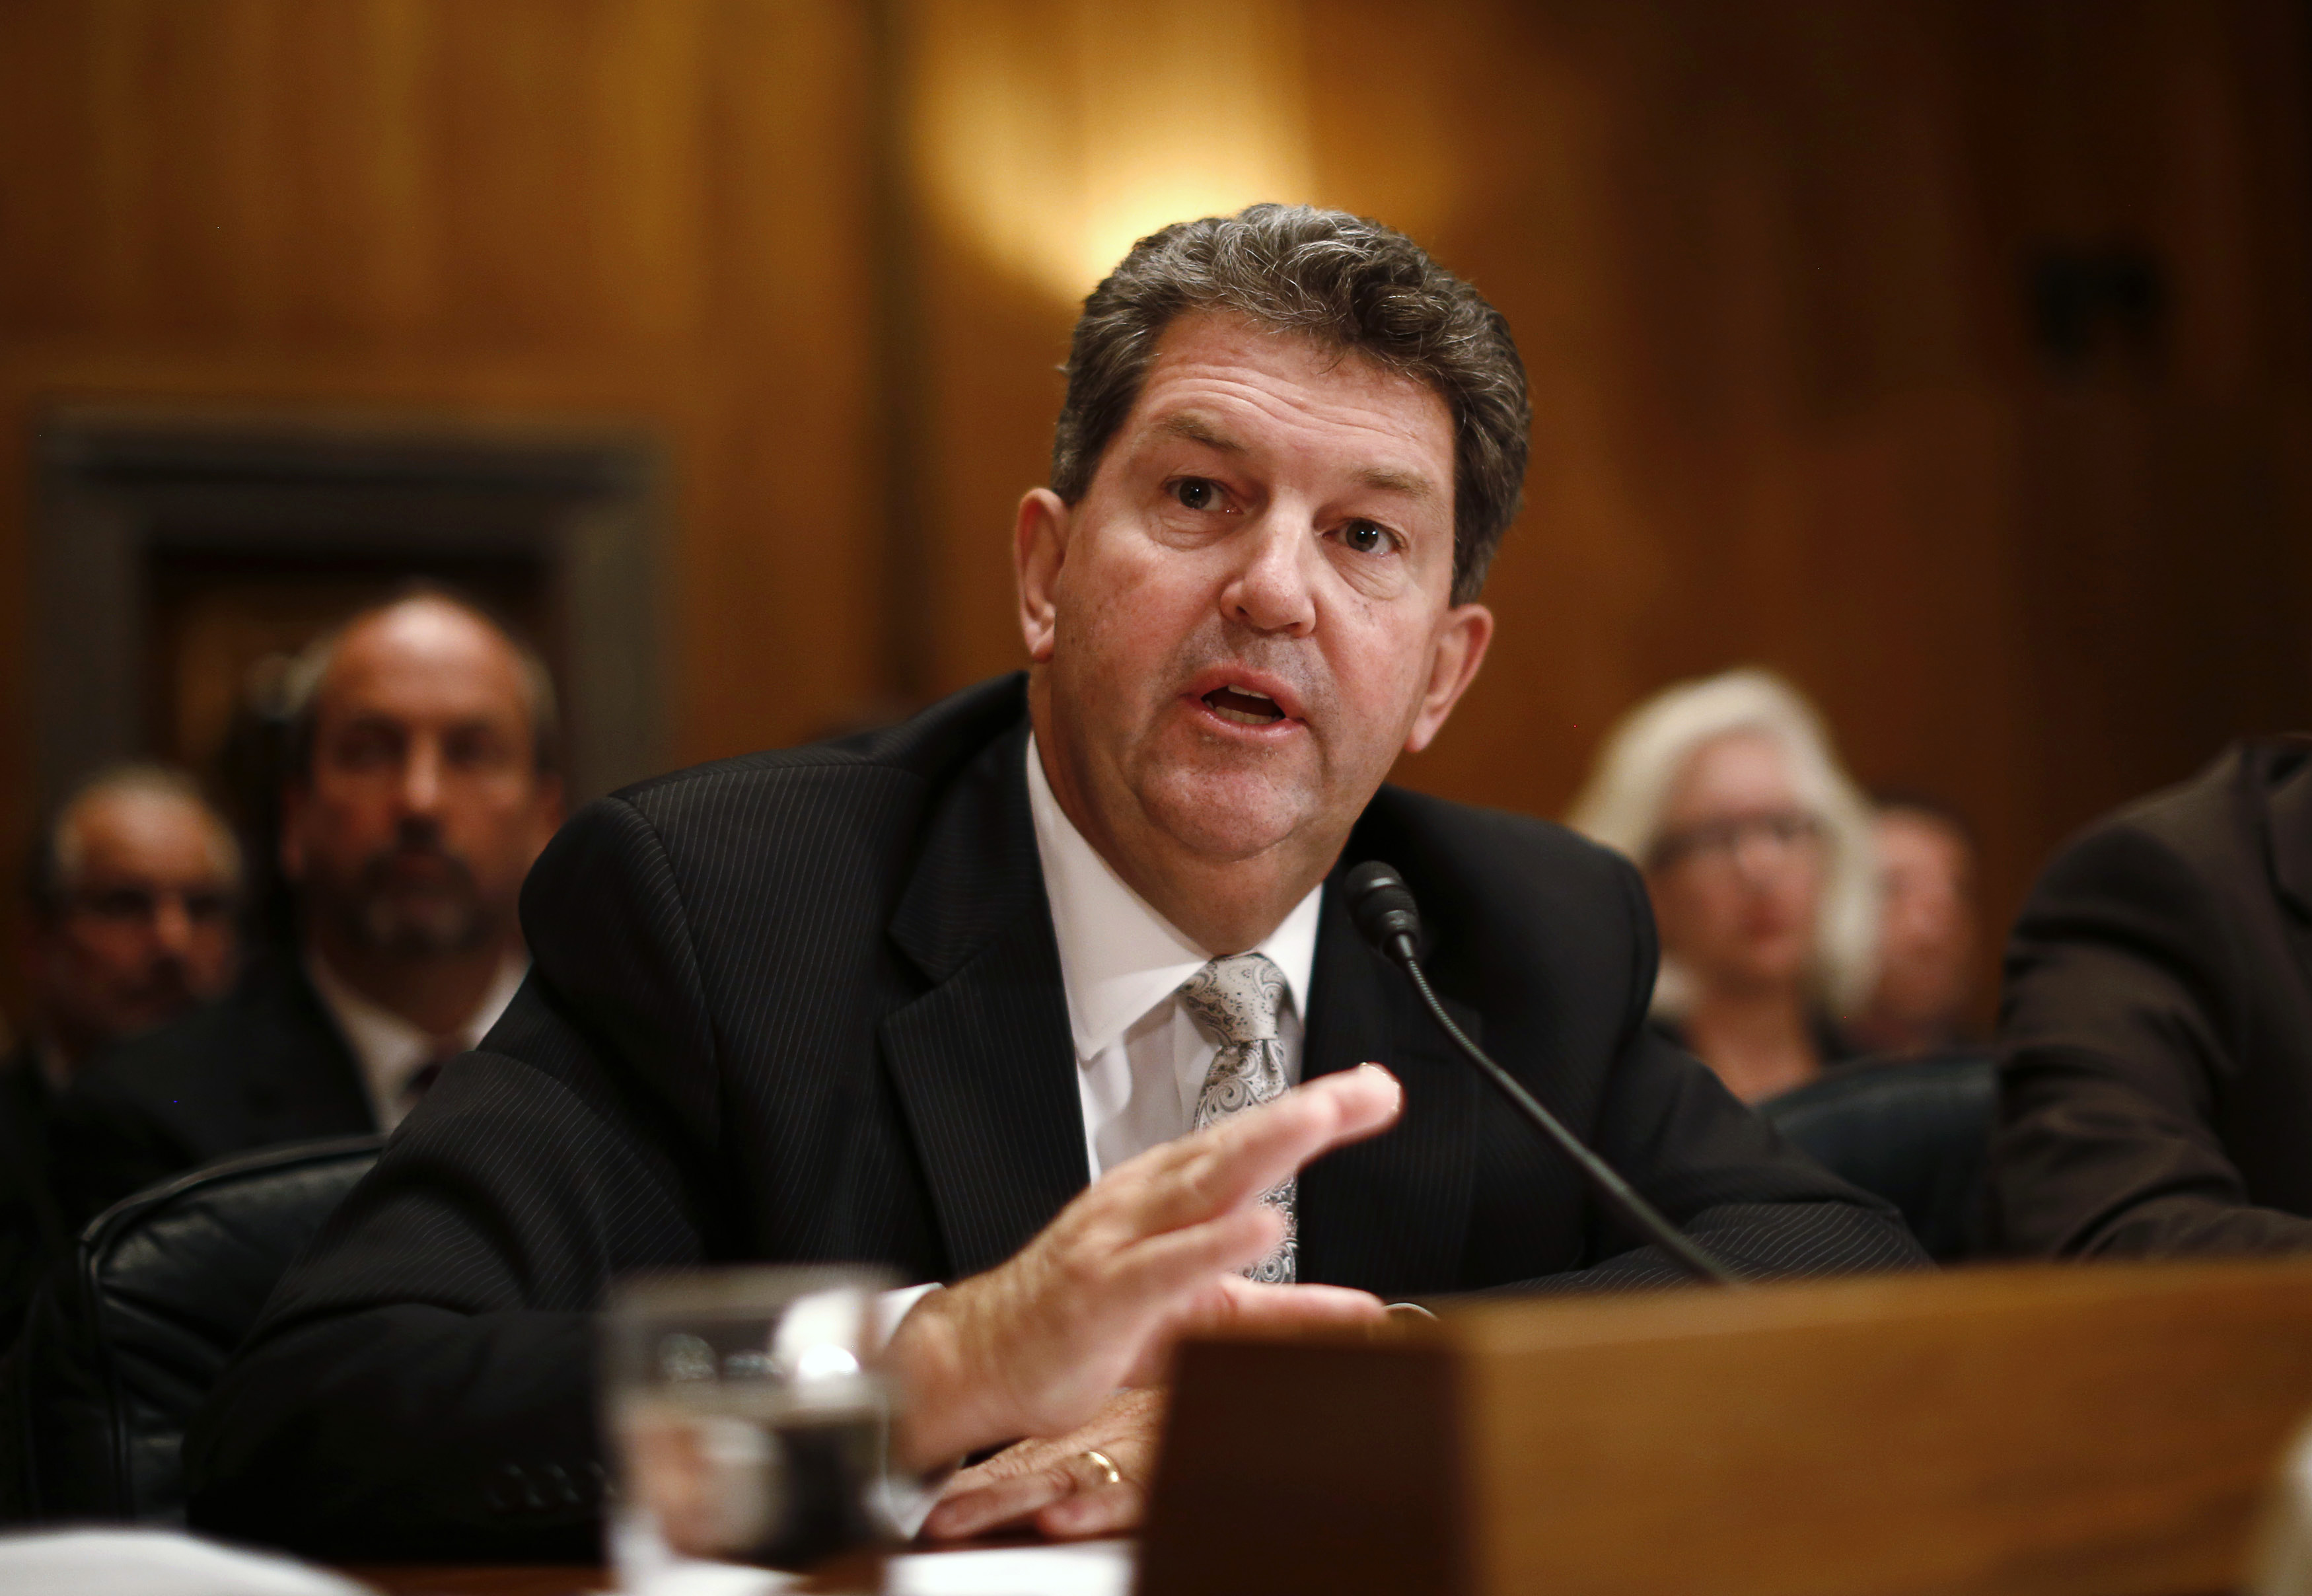 U.S. Postmaster General Donahoe speaks at a hearing on reforming the U.S. postal service, in Washington